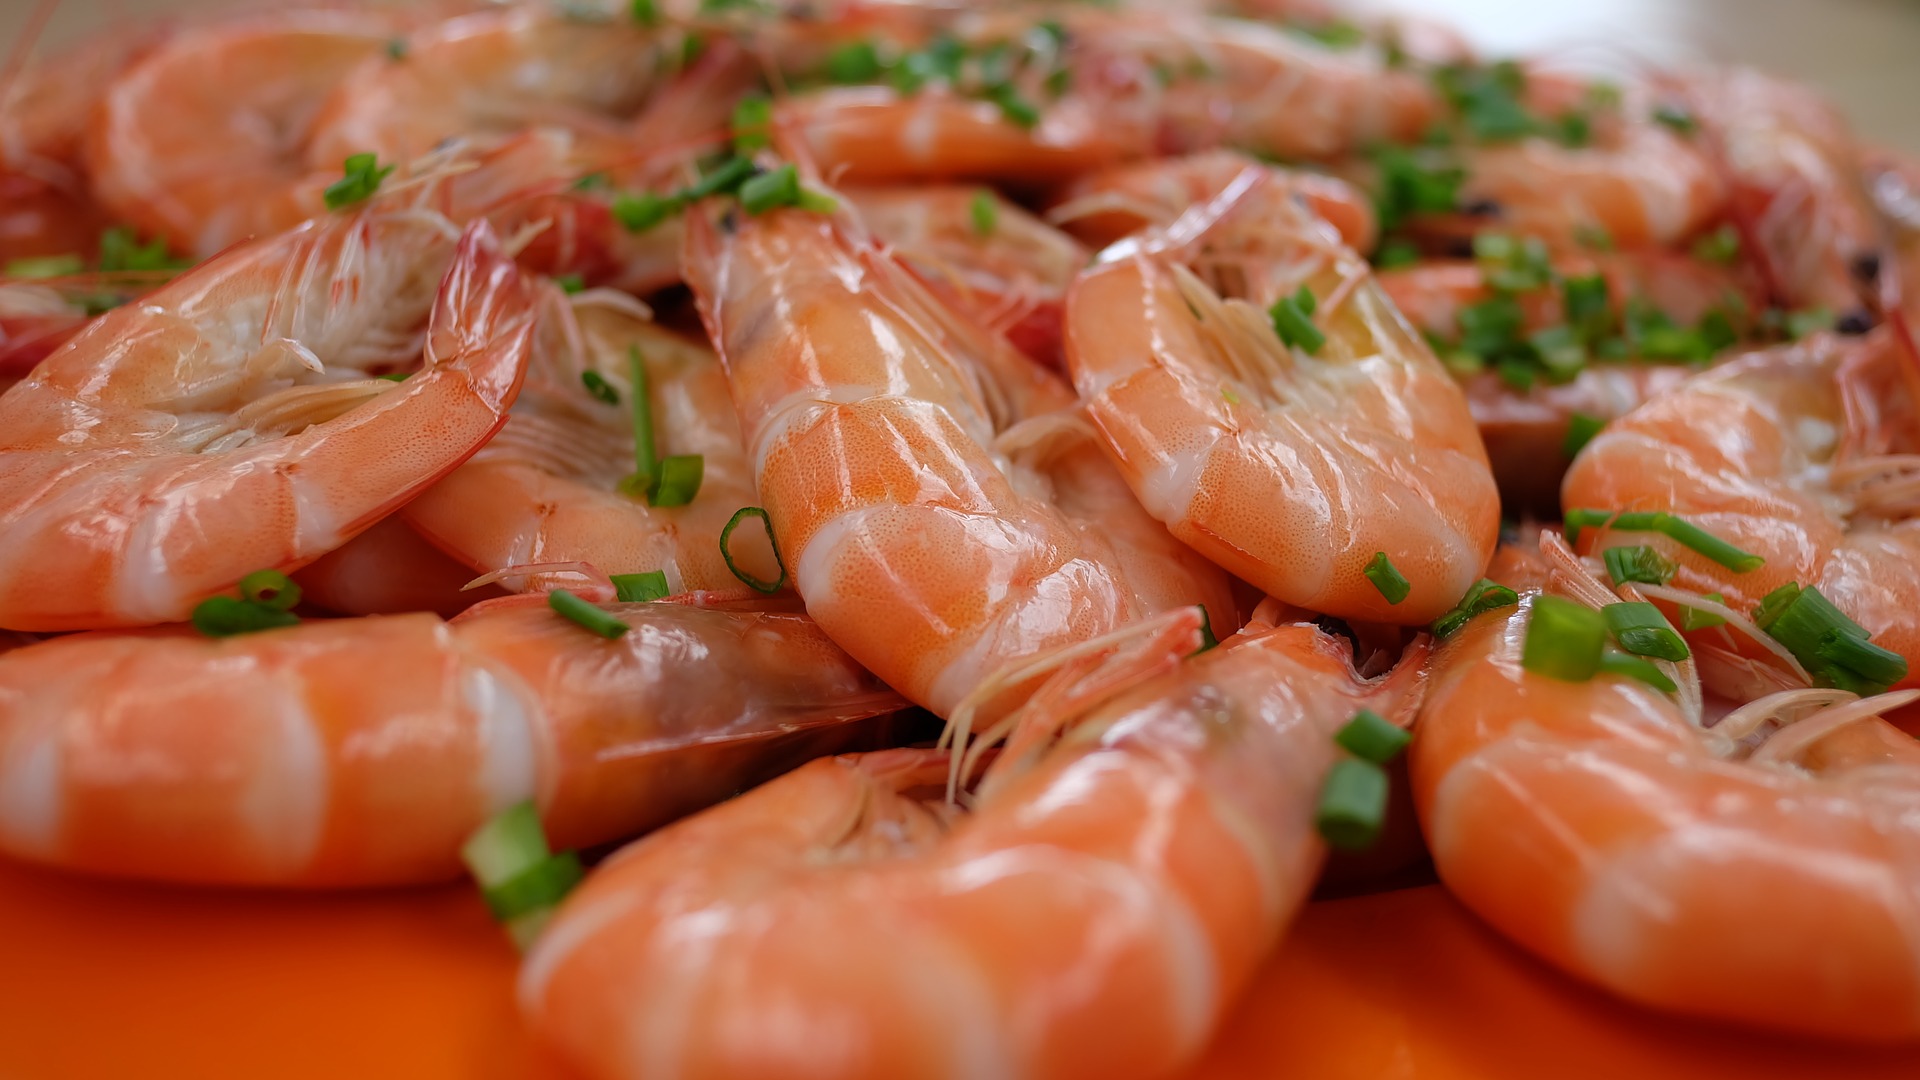 Strong imports in East Asia and the United States of America kept global shrimp trade firm